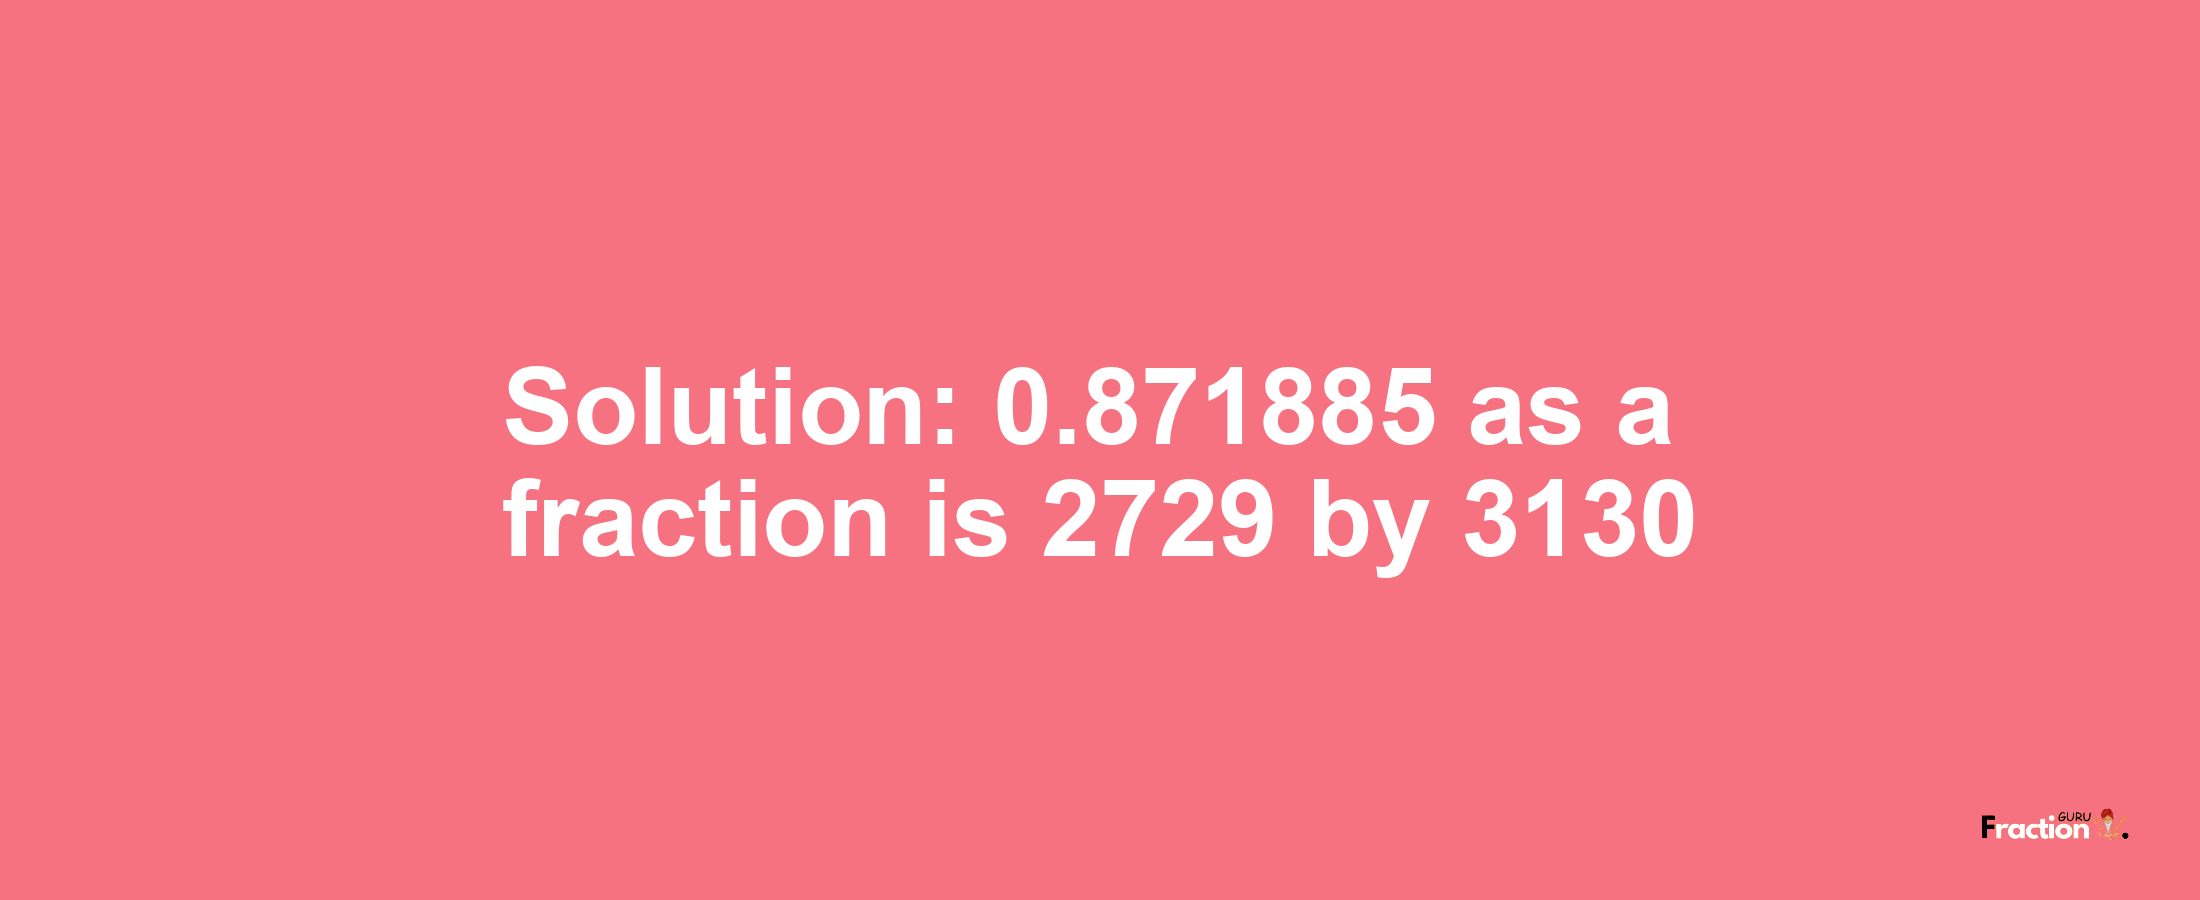 Solution:0.871885 as a fraction is 2729/3130